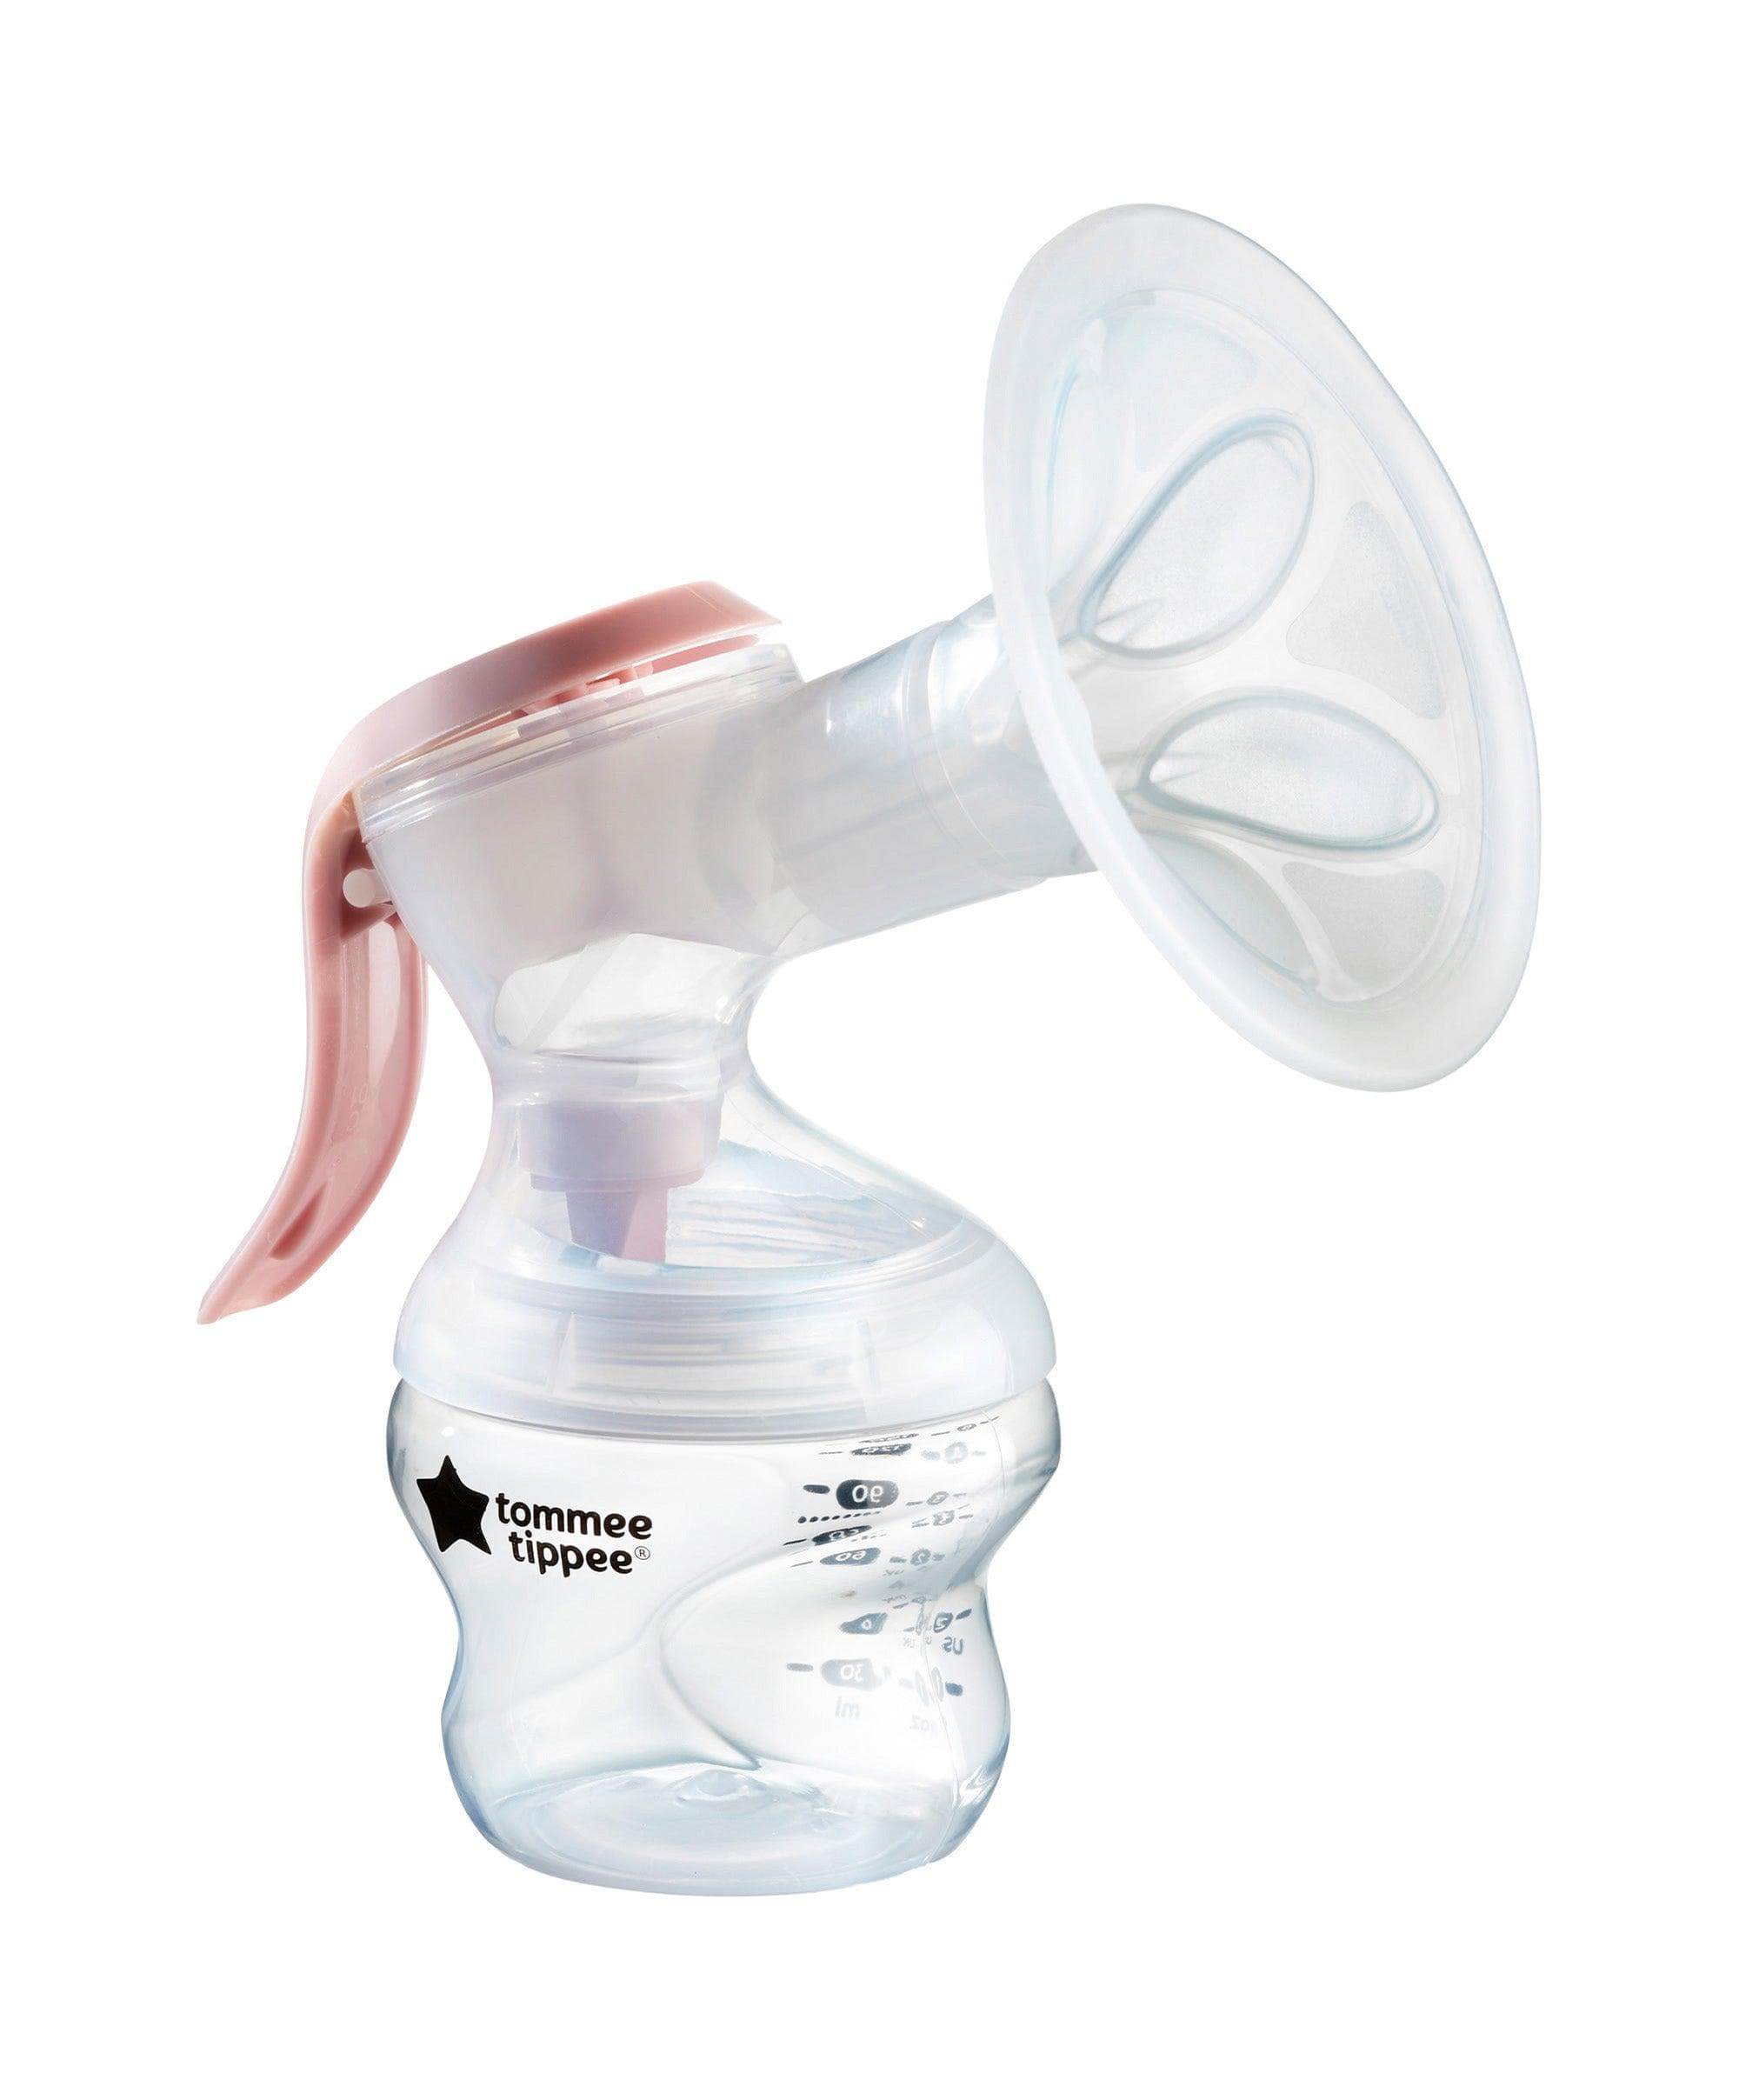 Tommee Tippee Made for Me Single Manual Breast Pump – Mamas & Papas UK